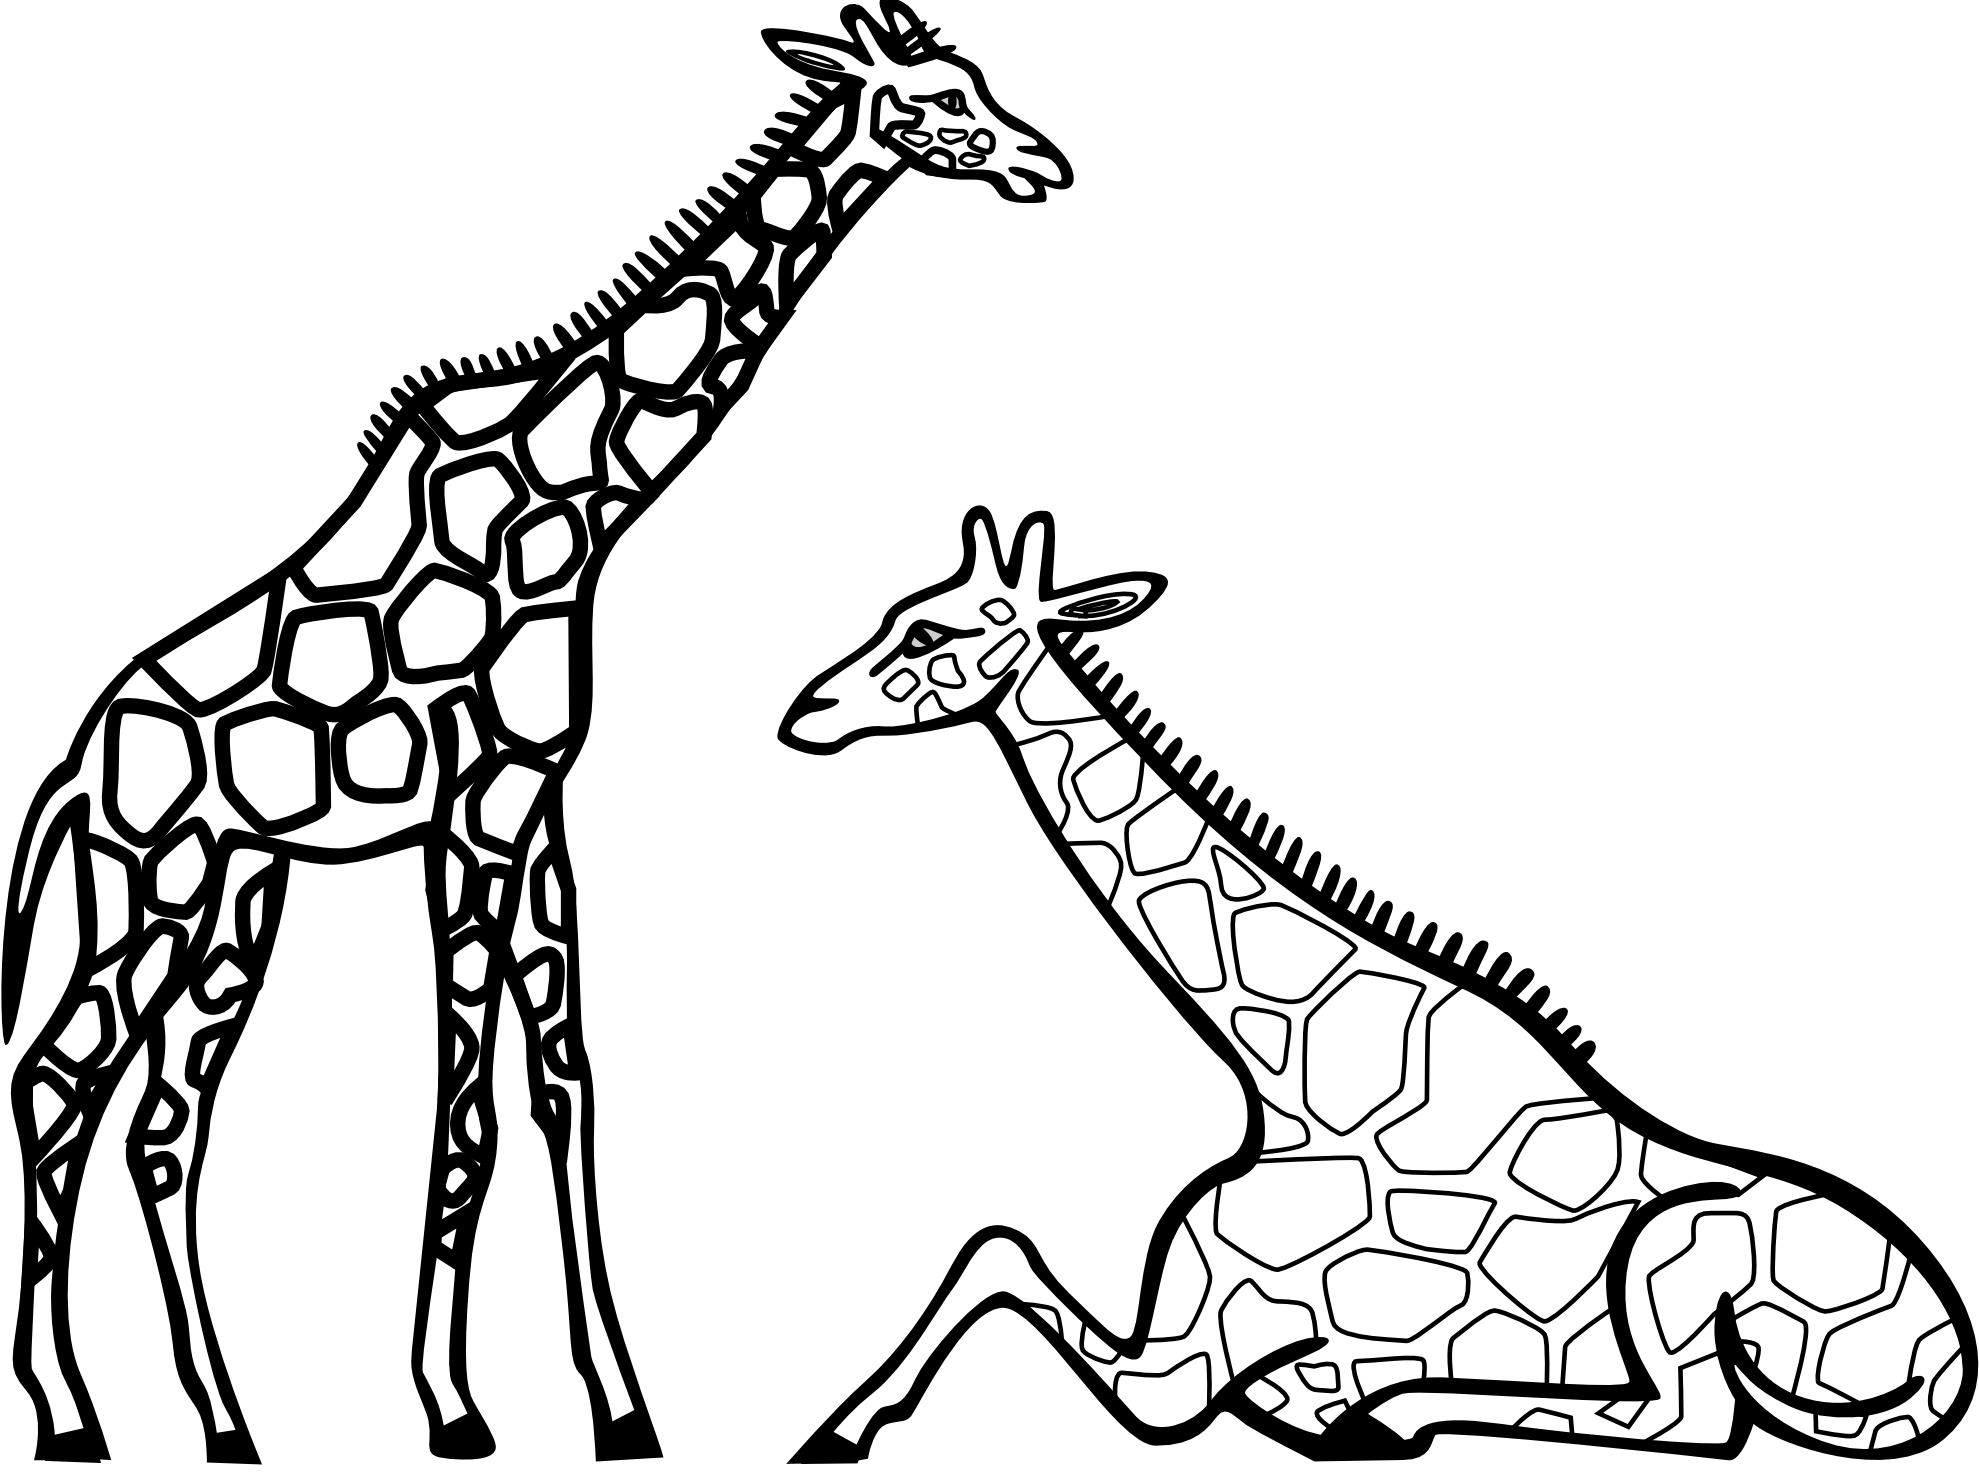 Giraffe clipart black and white outline png